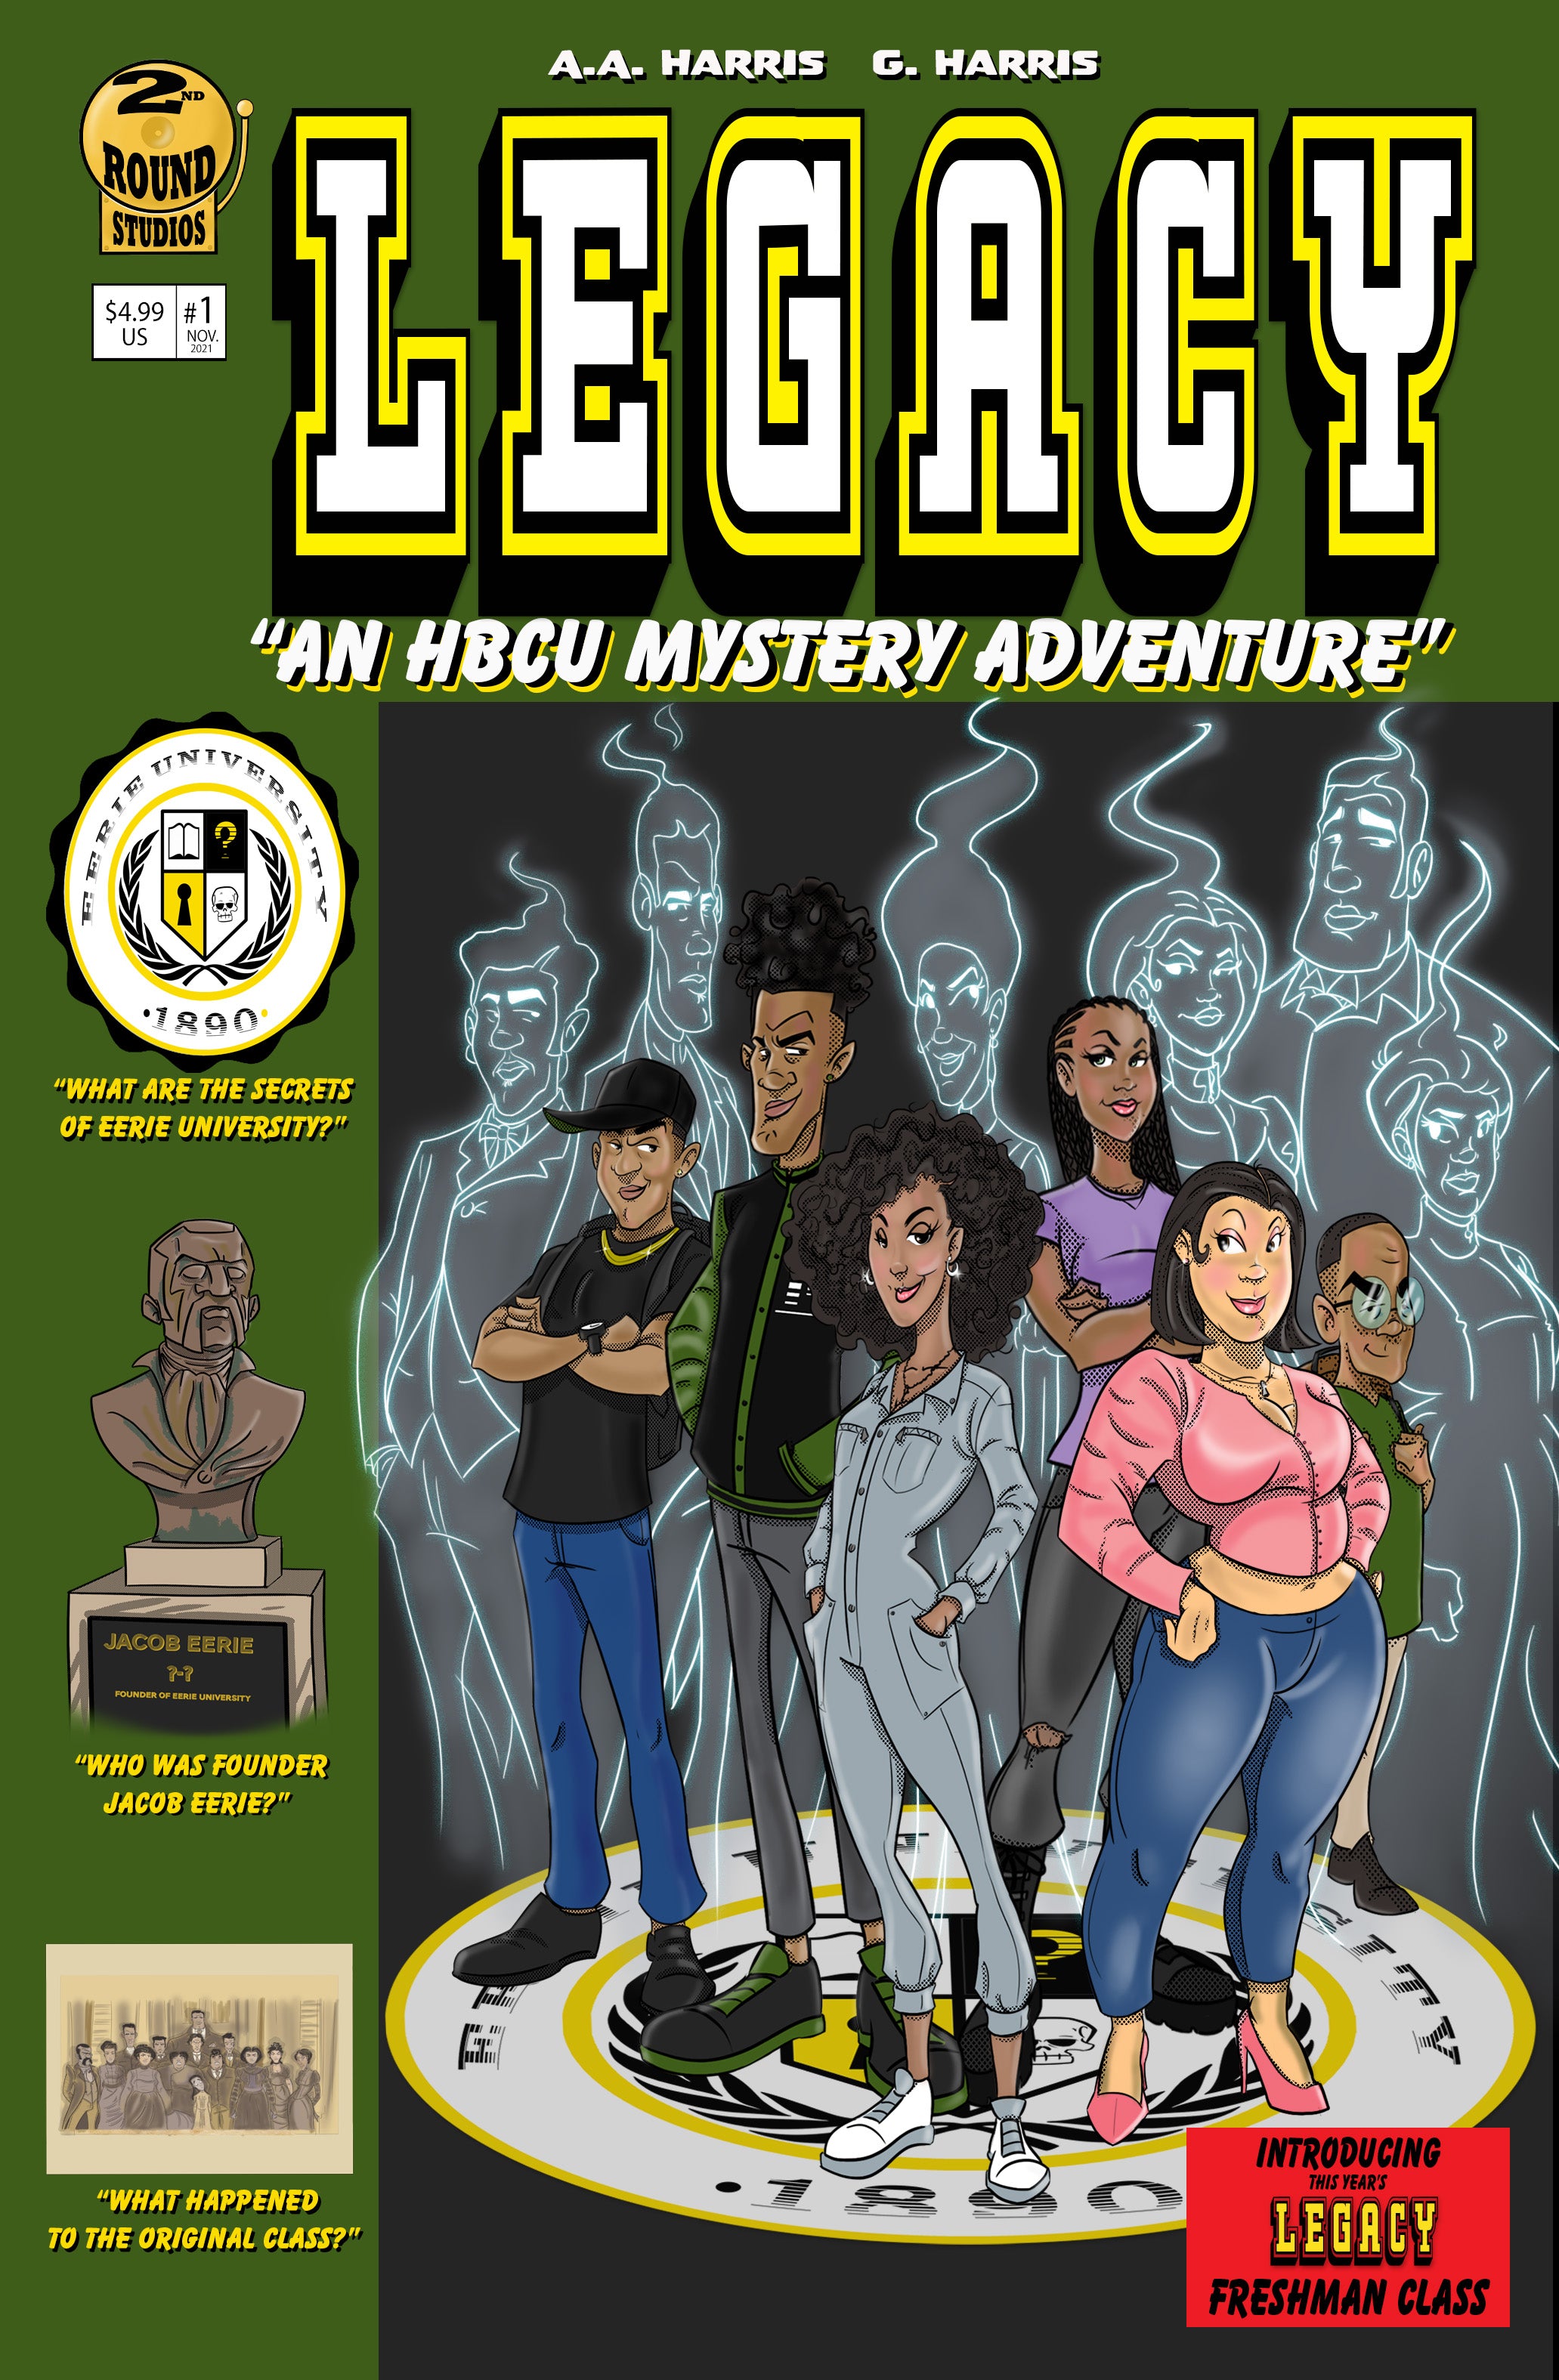 Legacy comic book cover featuring six HBCU students surrounded by ghosts